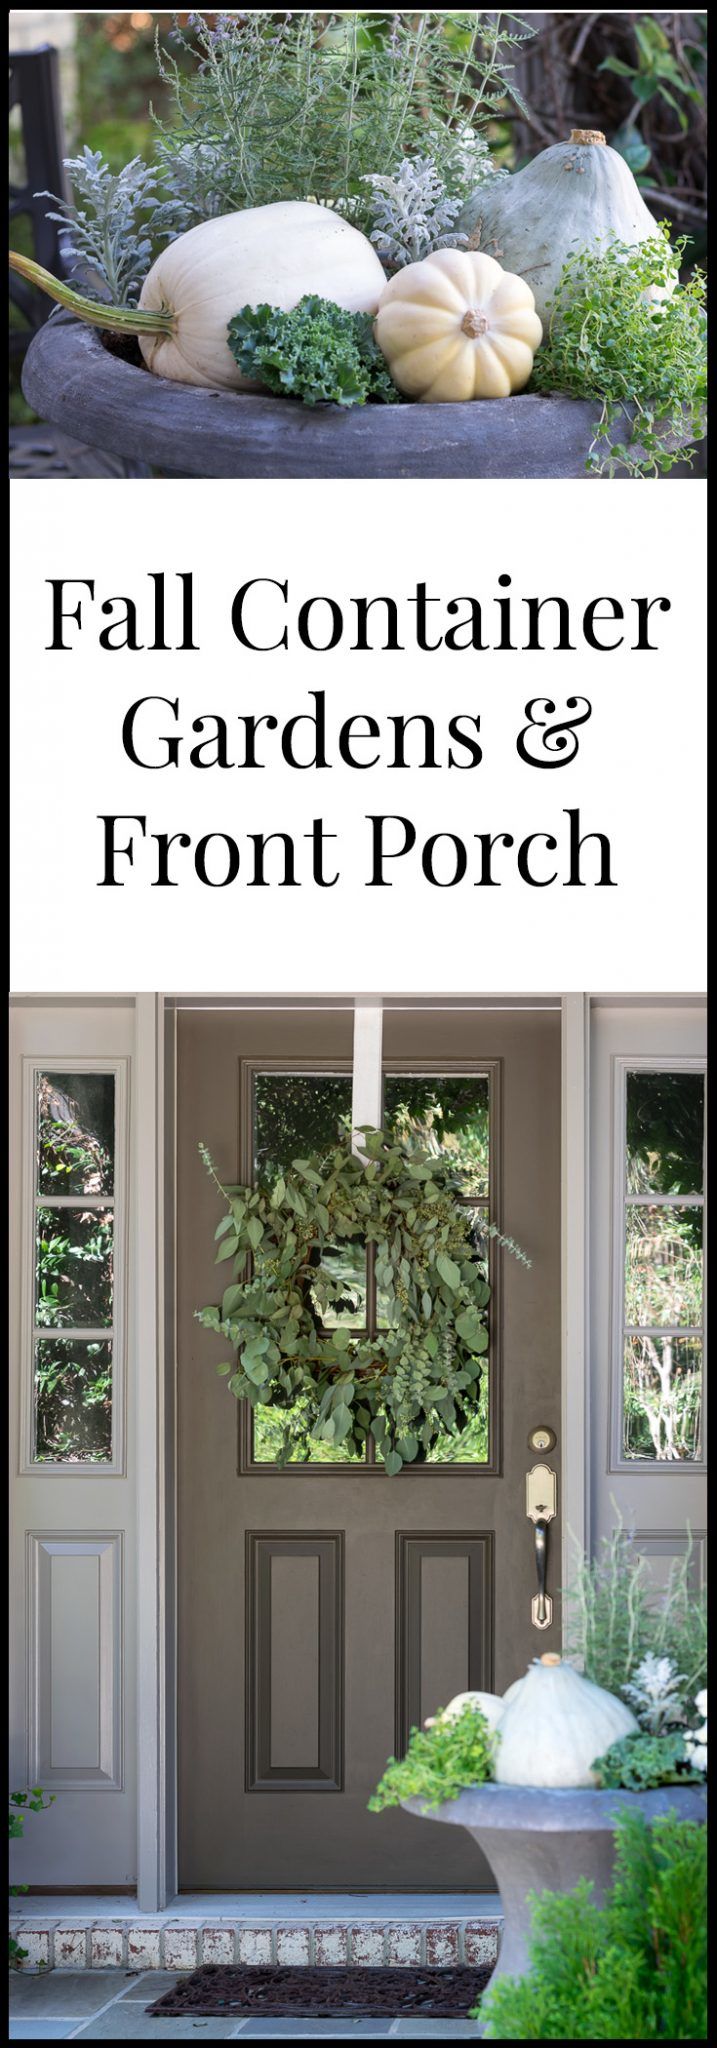 Natural and Neutral Fall Container Garden and Front Porch Ideas using primarily Grocery Store Produce, Vegetables and Herbs with a few nursery items to fill in. The gray/green/white hues echo a softer side of Autumn.